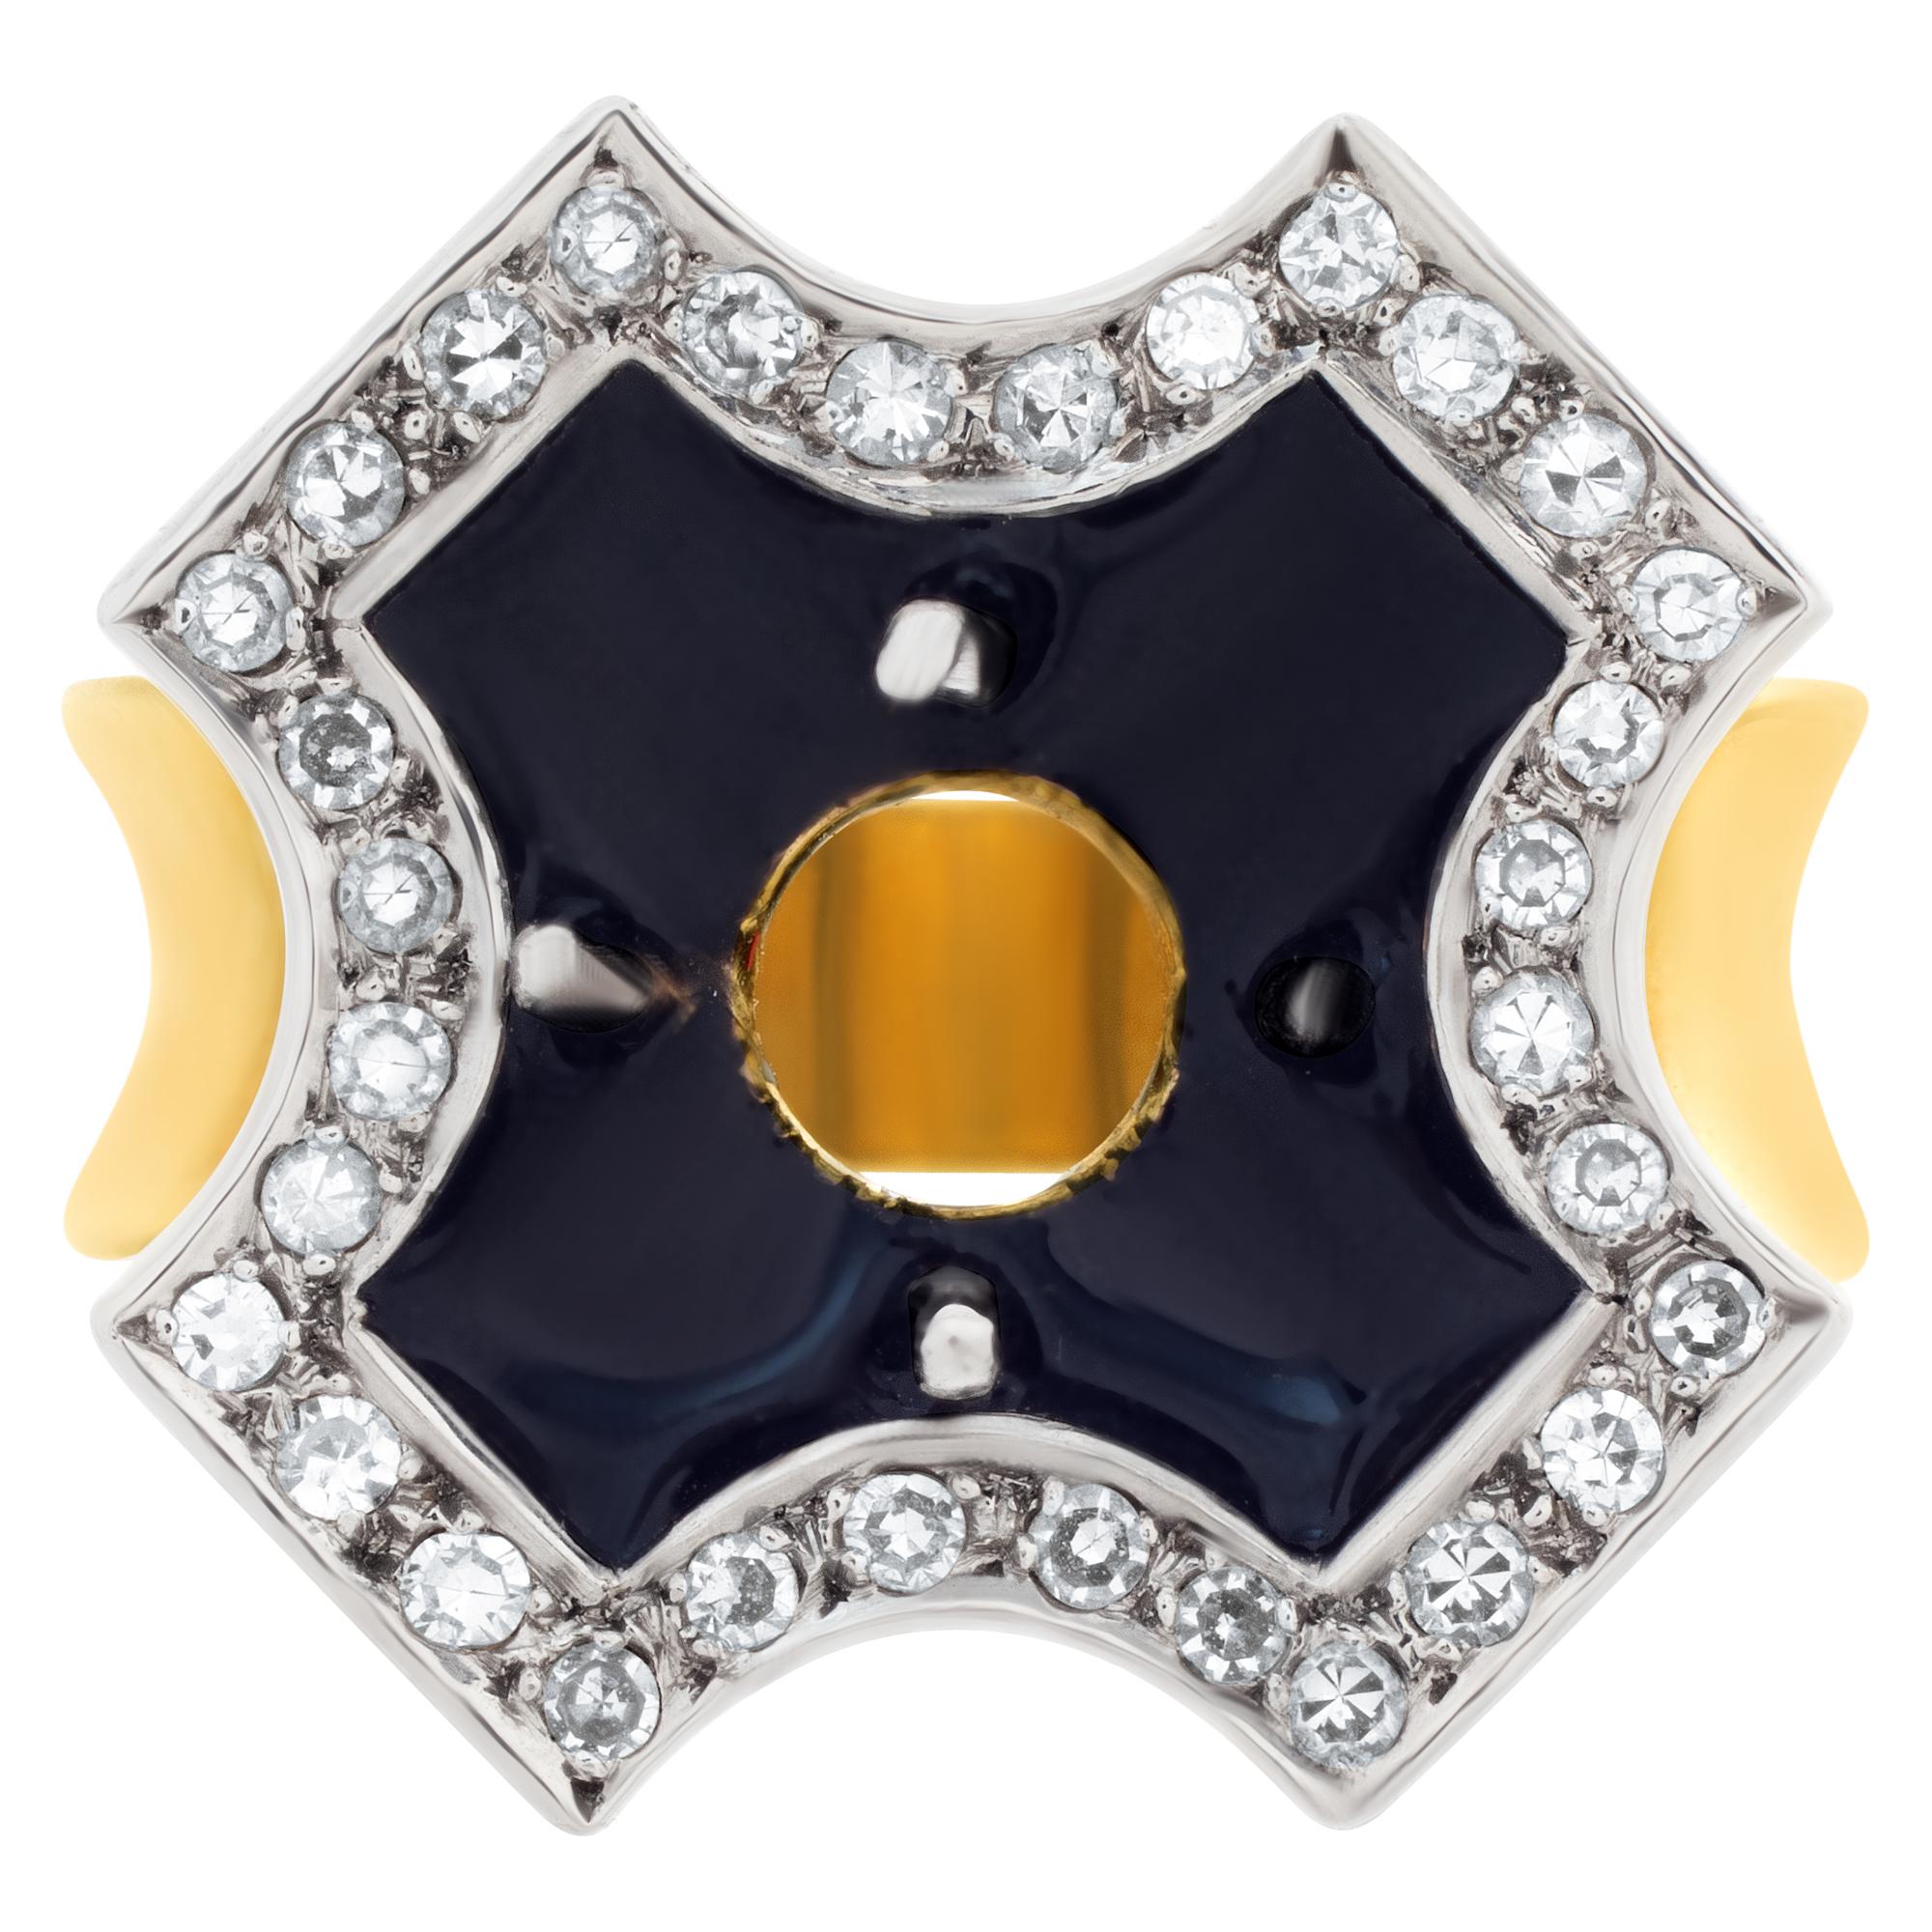 Black enamel Maltese cross design setting in 18k yellow gold with 0.50 carats in diamonds. Use this setting with your diamond or ask us about our loose diamond inventory.This Diamond ring is currently size 5.5 and some items can be sized up or down,